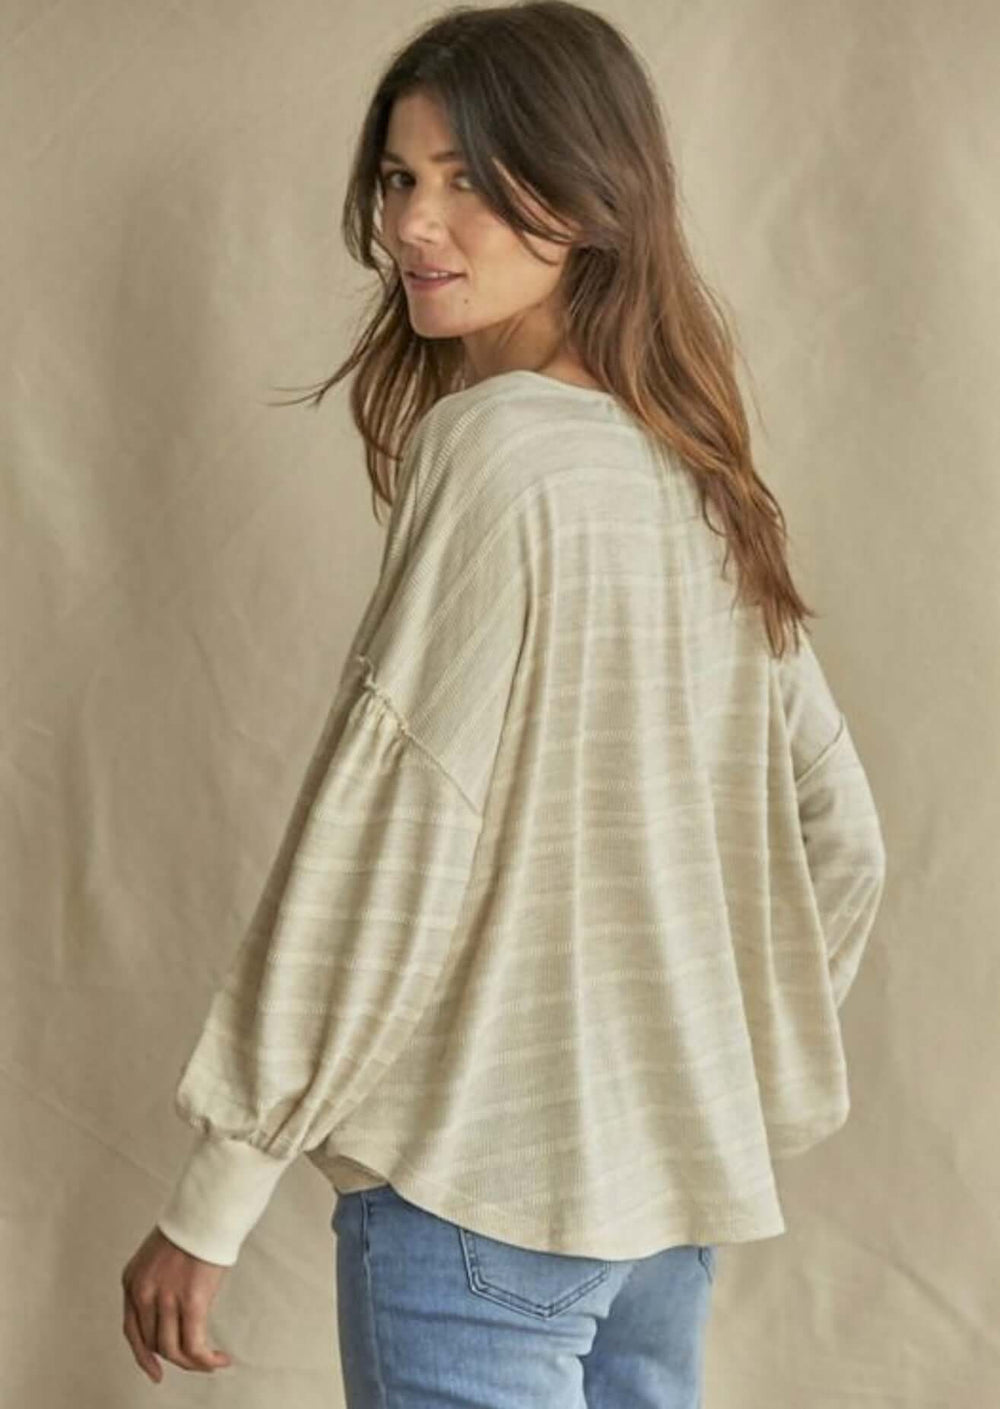 Ladies Knit Thermal Striped Long Sleeve Henley Oversized Boxy Top in Oatmeal Color | Made in USA | Classy Cozy Cool Women's Made in America Online Clothing Boutique 